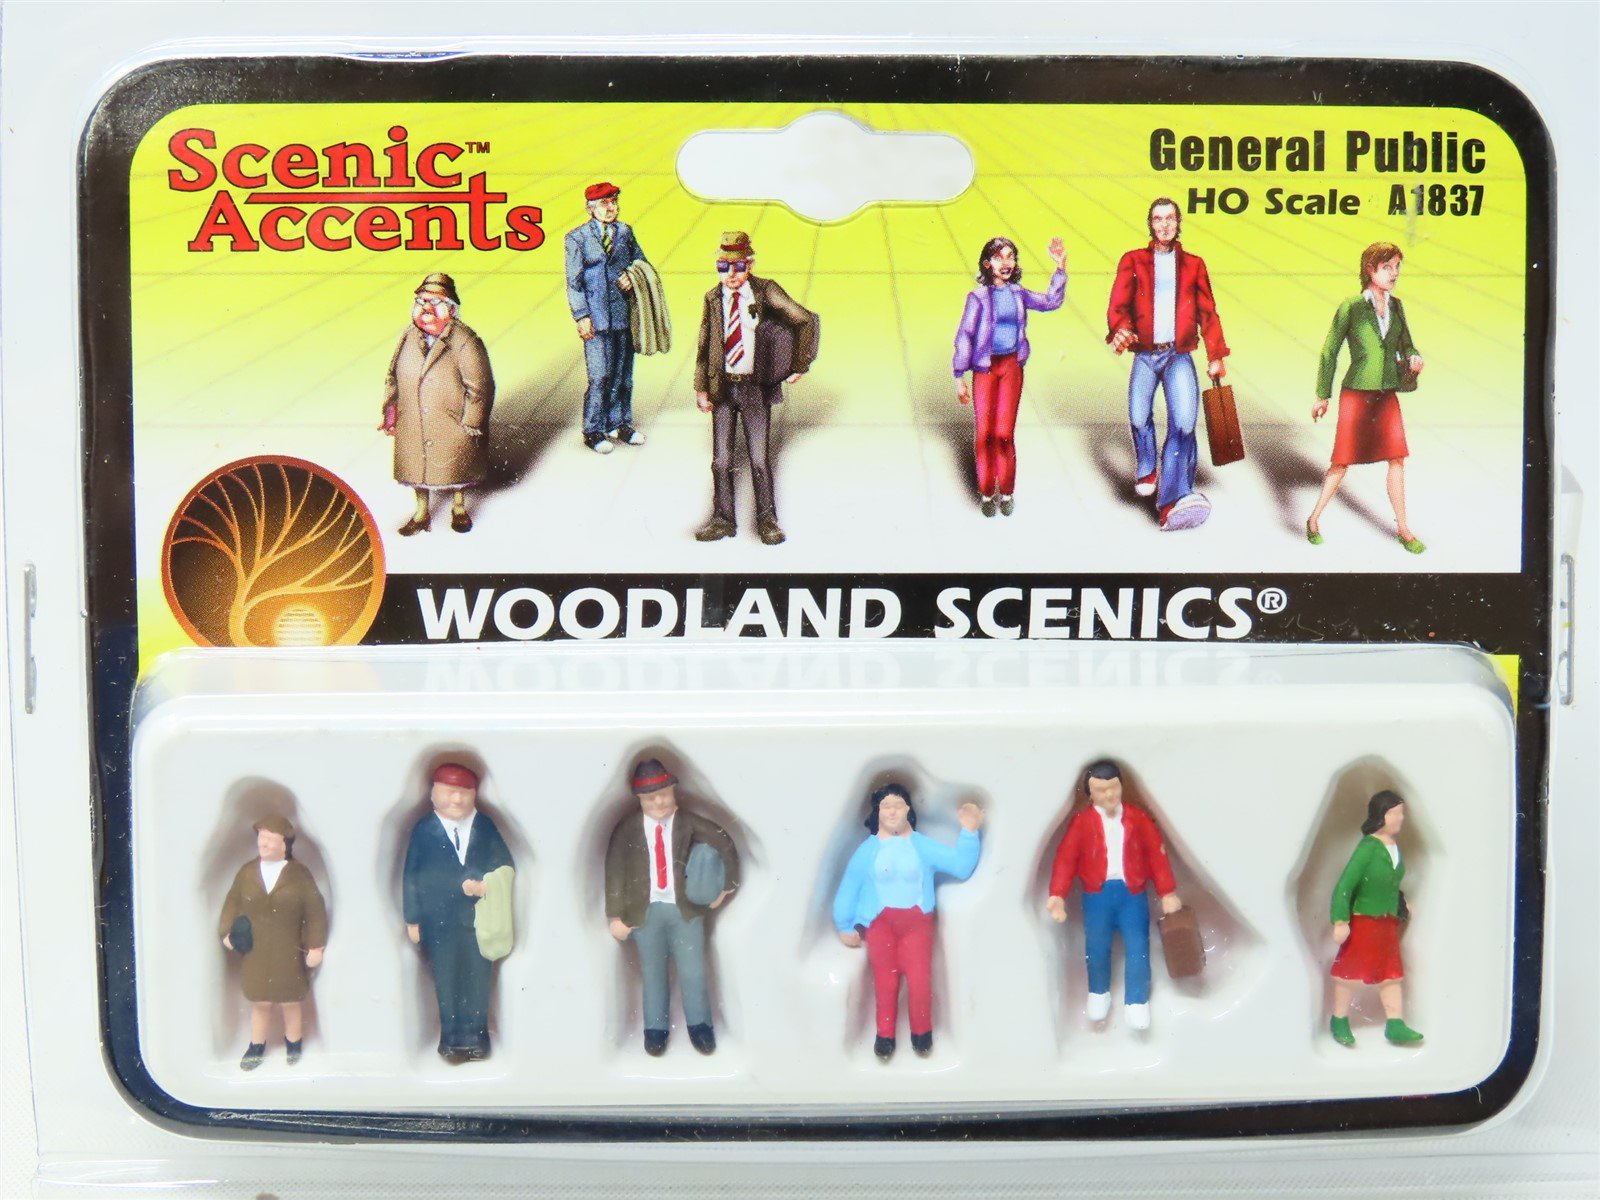 Woodland Scenic Accents Fly Fishermen for HO Scale Model Railway